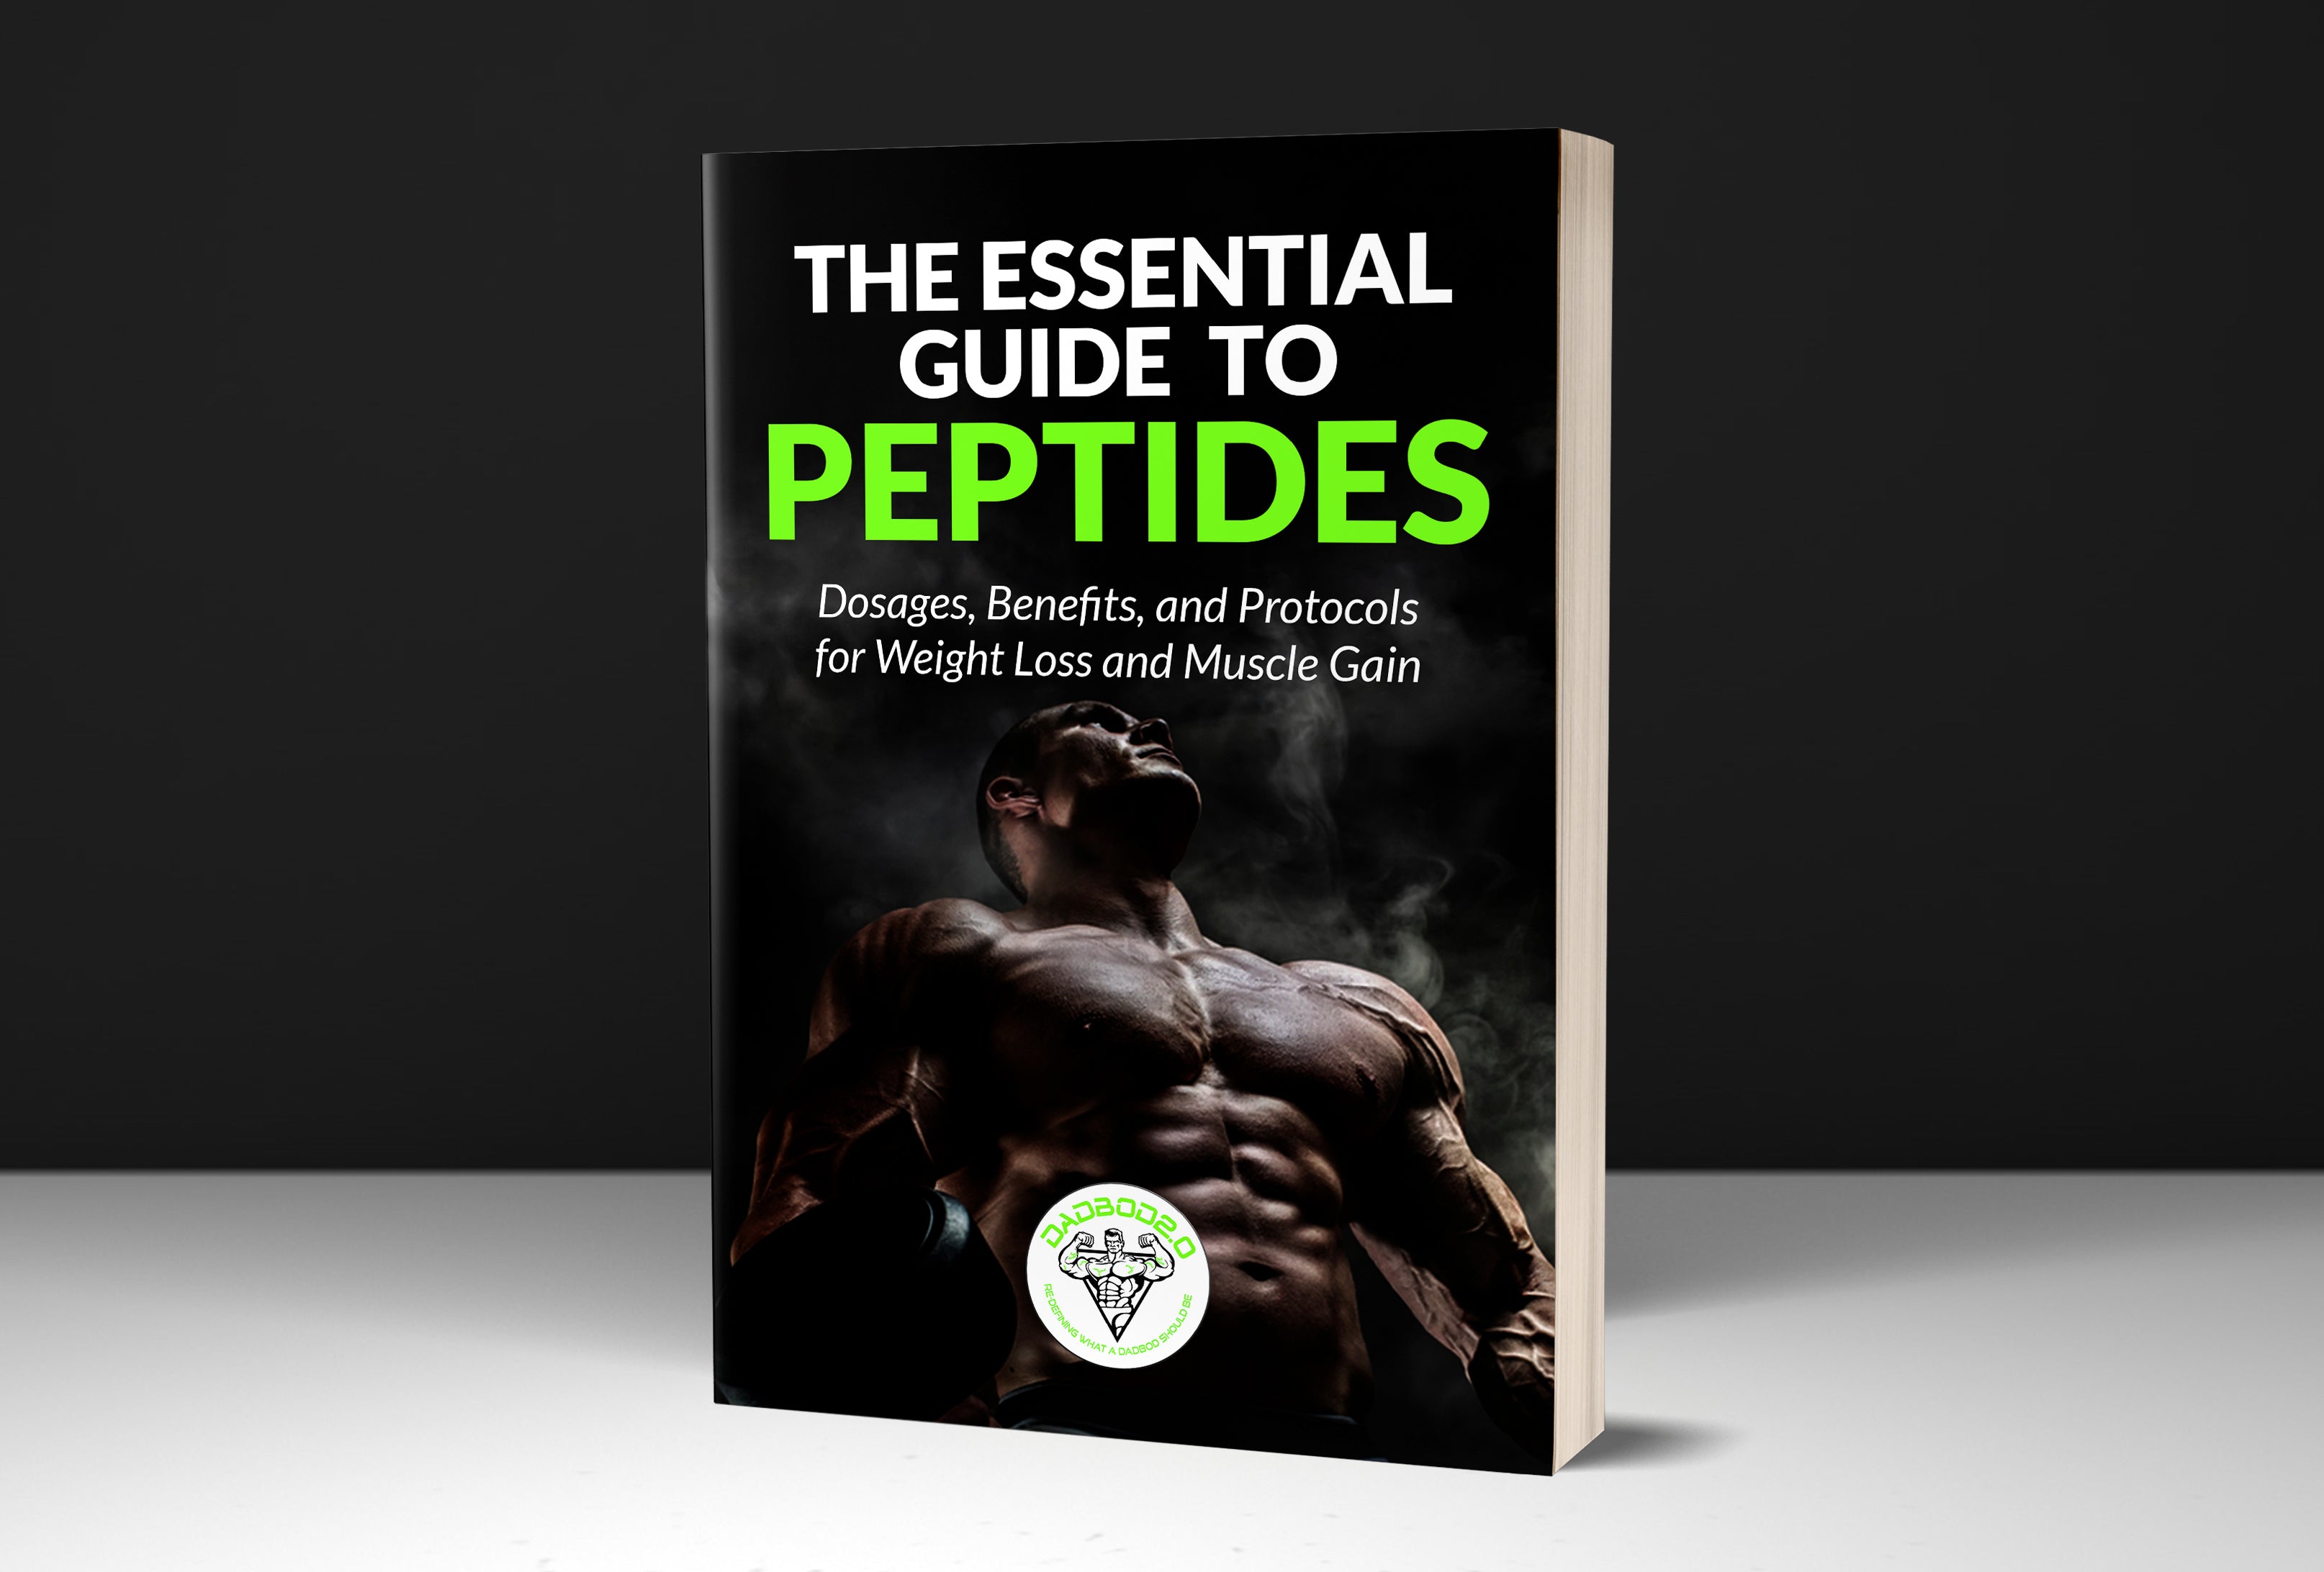 The Essential Guide to Peptides